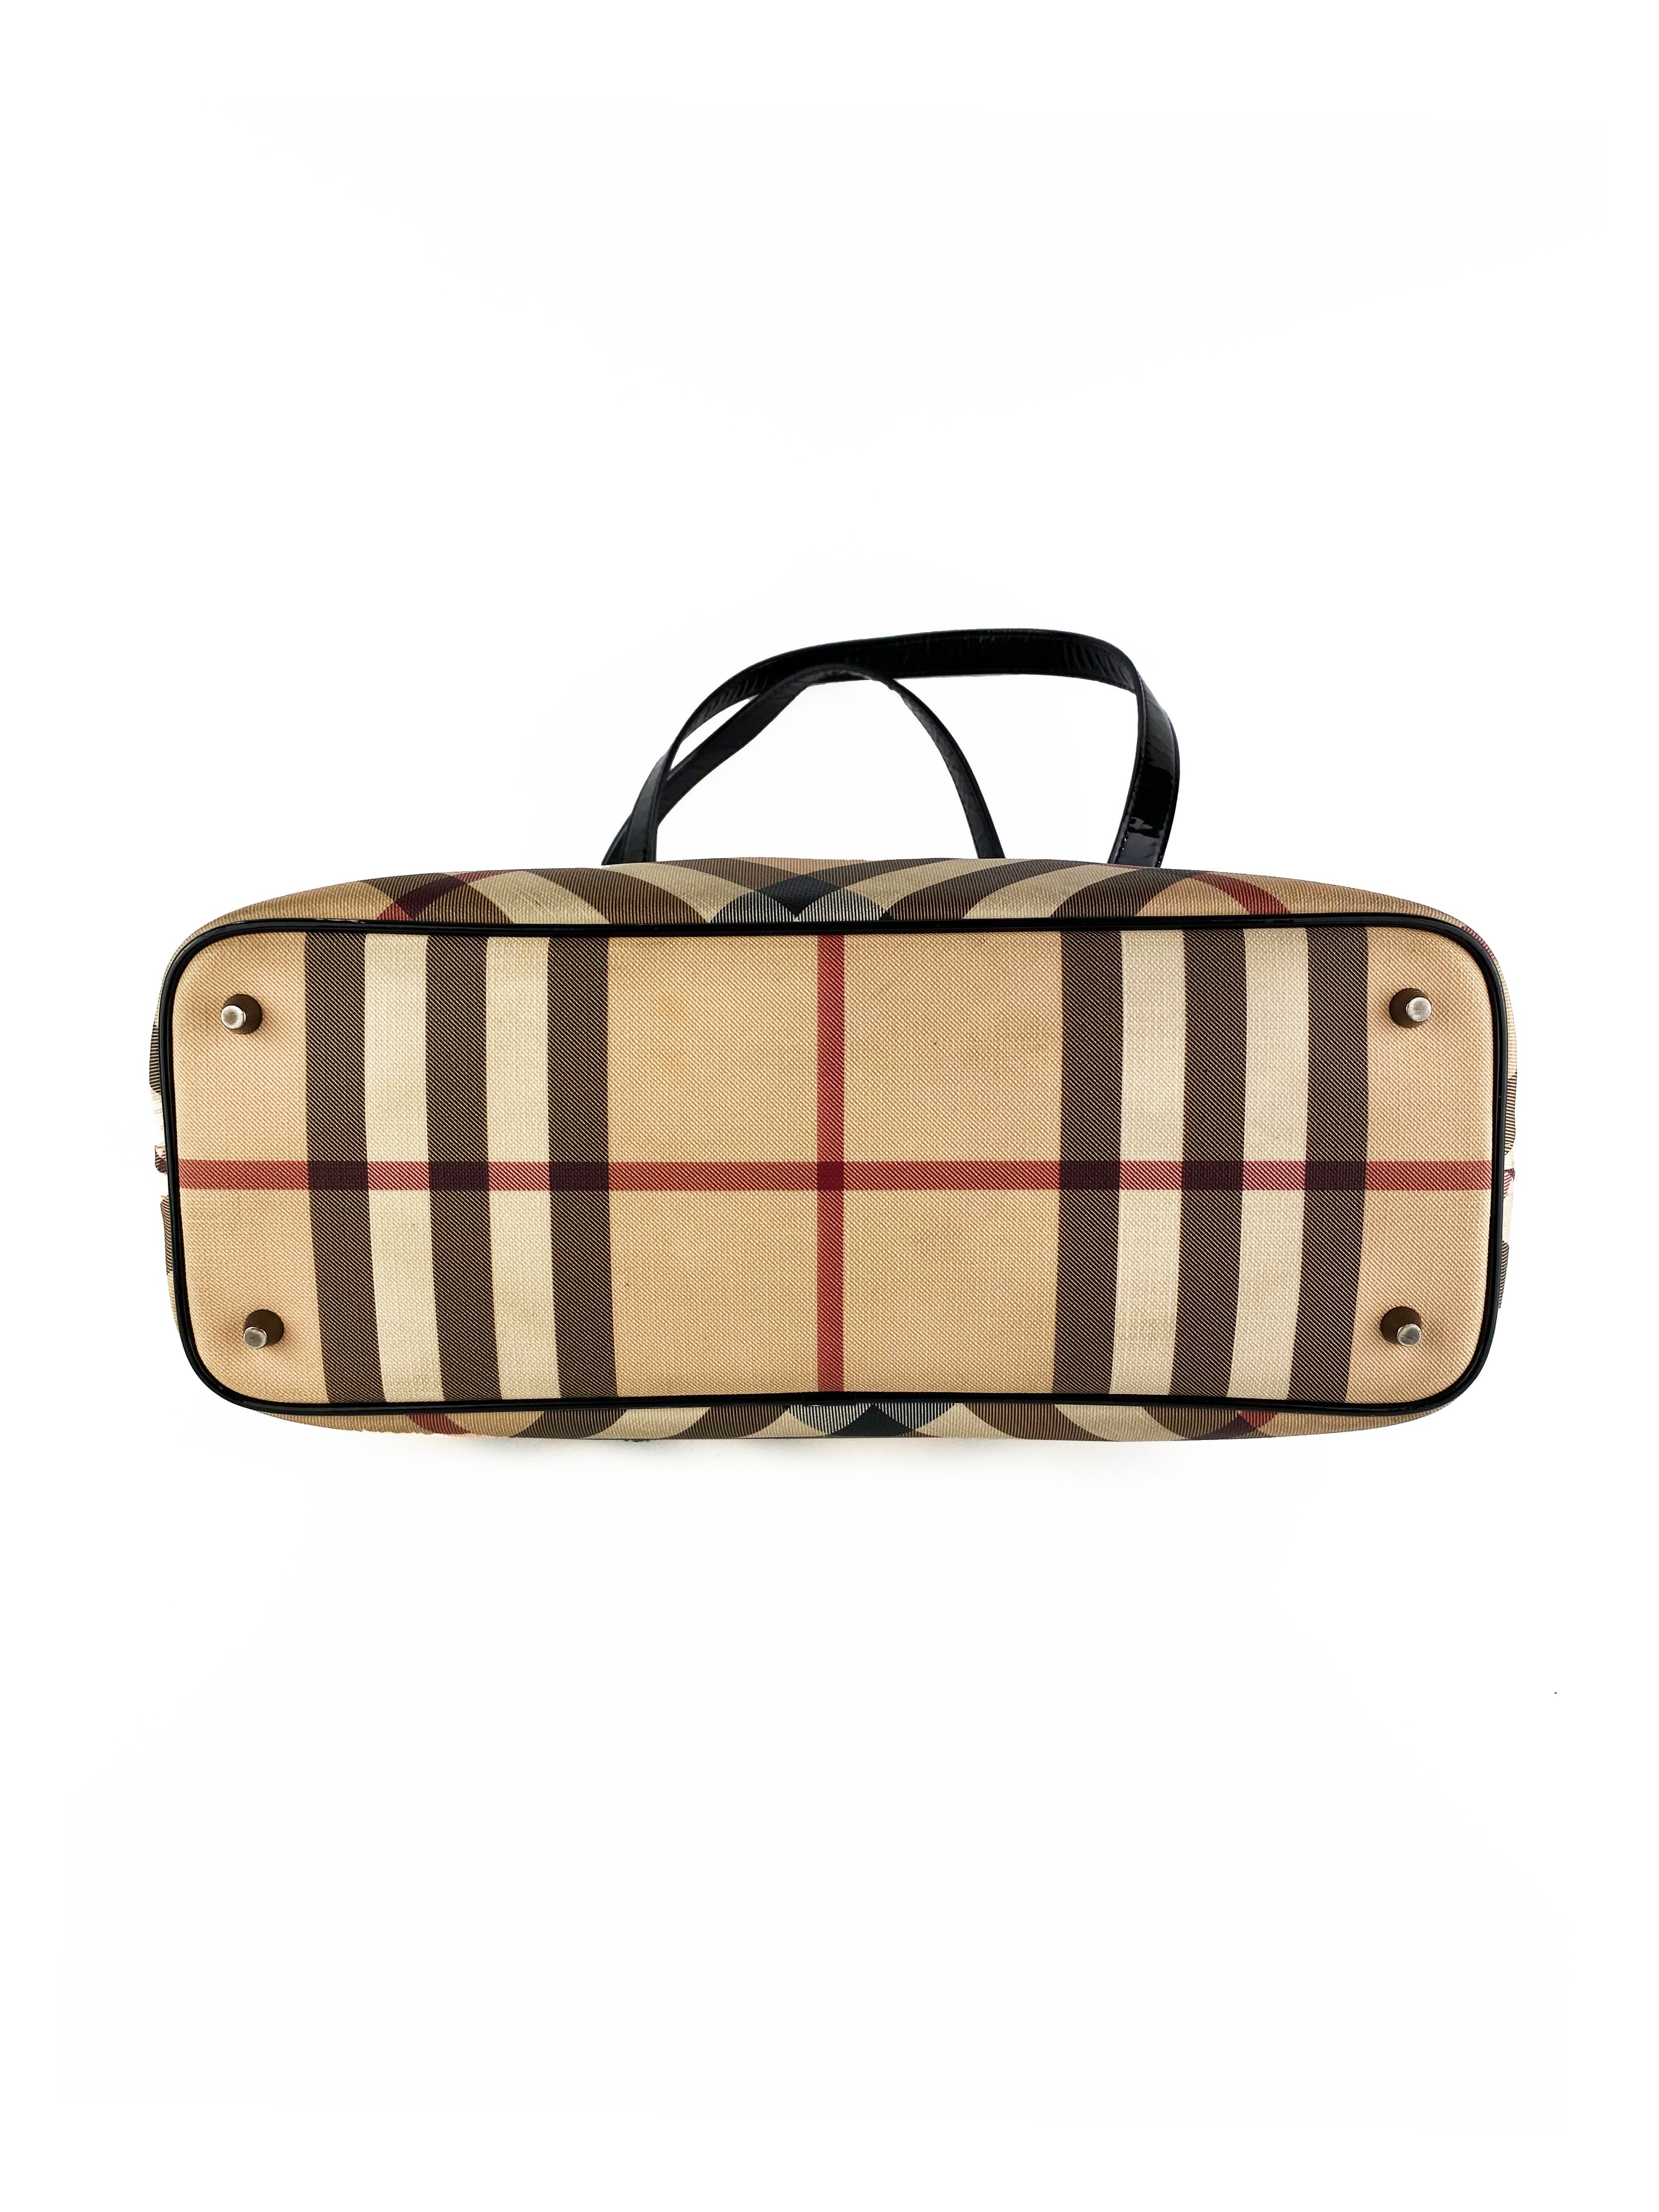 Burberry Vintage Check Tote